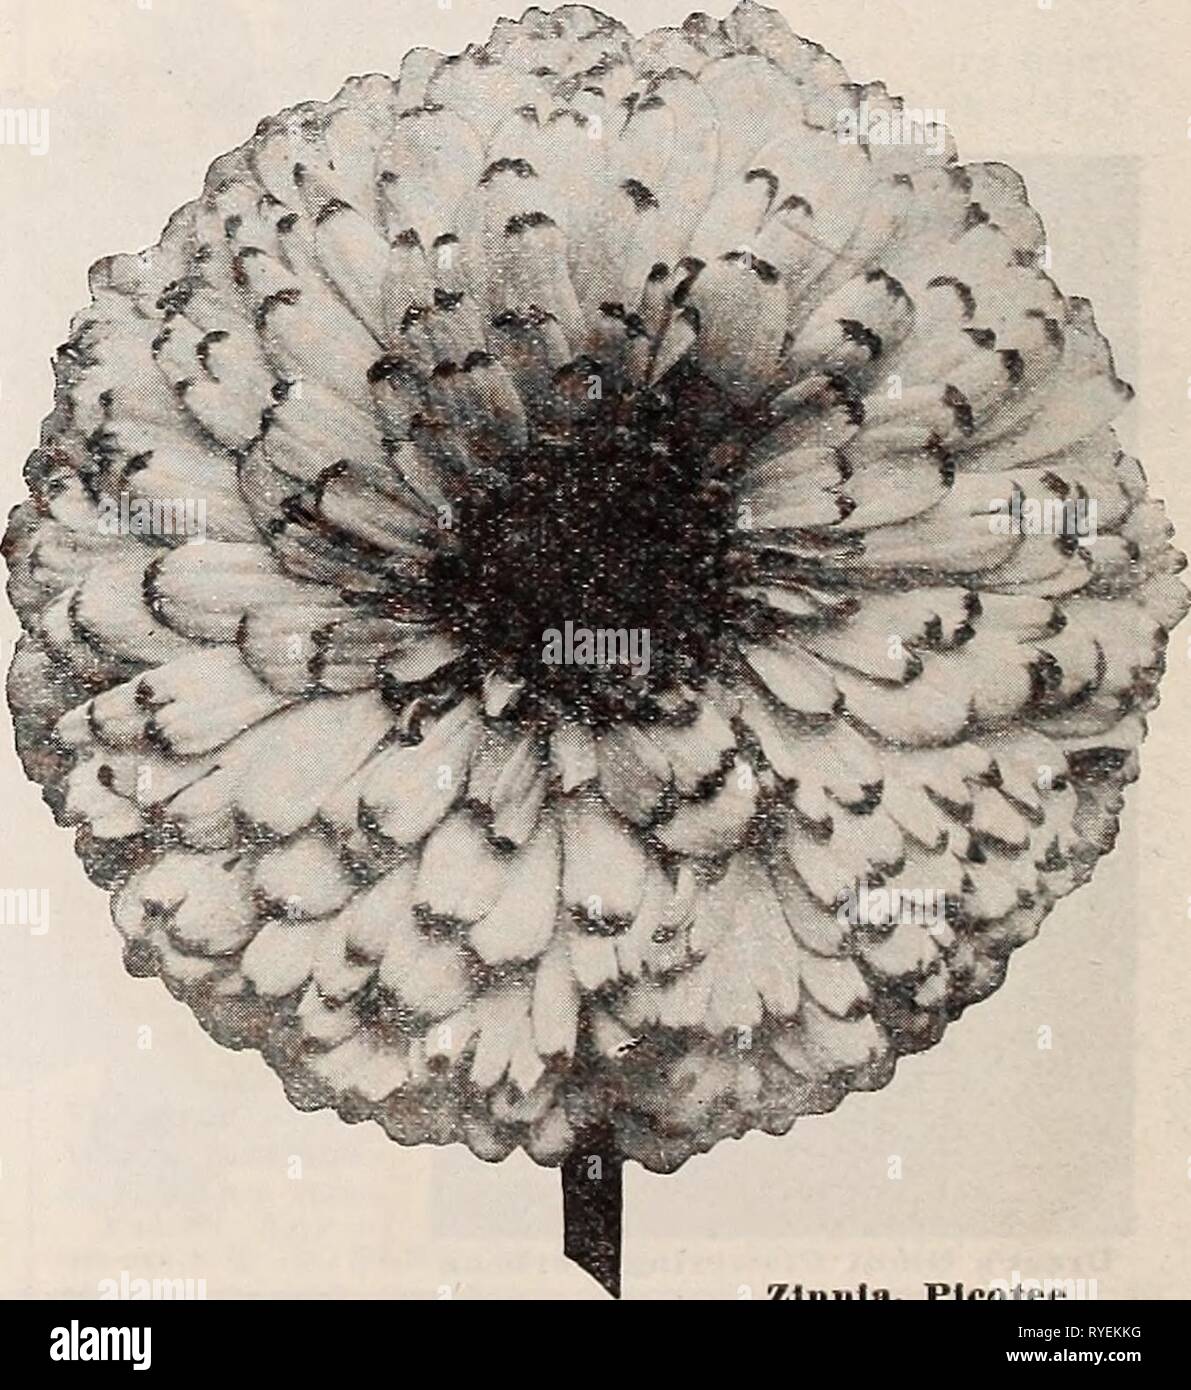 Dreer's wholesale price list for florists : flower seeds plants and bulbs vegetable and lawn grass seeds sundries  dreerswholesalep1934henr 0 Year: 1934  22 HENRY A. DREER Flower Seeds WHOLESALE LIST 1 KSk J &gt;p yi^L ^S Rsl Ehmt' ^ . X- 'St JBaaa^*' J 'Vinca Rosea Verbena Royal Bouquet The plants are upright in growth, 15 to 18 inches tall, with straight stems and large flowers in a brilliant mixture of colors. Excellent for bedding, cutting or as a pot plant. Mixed Colors. Tr. pkt., 50 cts.; oz., $3.00. Verbena Nana Compacta Fireball A dwarf compact 'Verbena about six inches high, literall Stock Photo